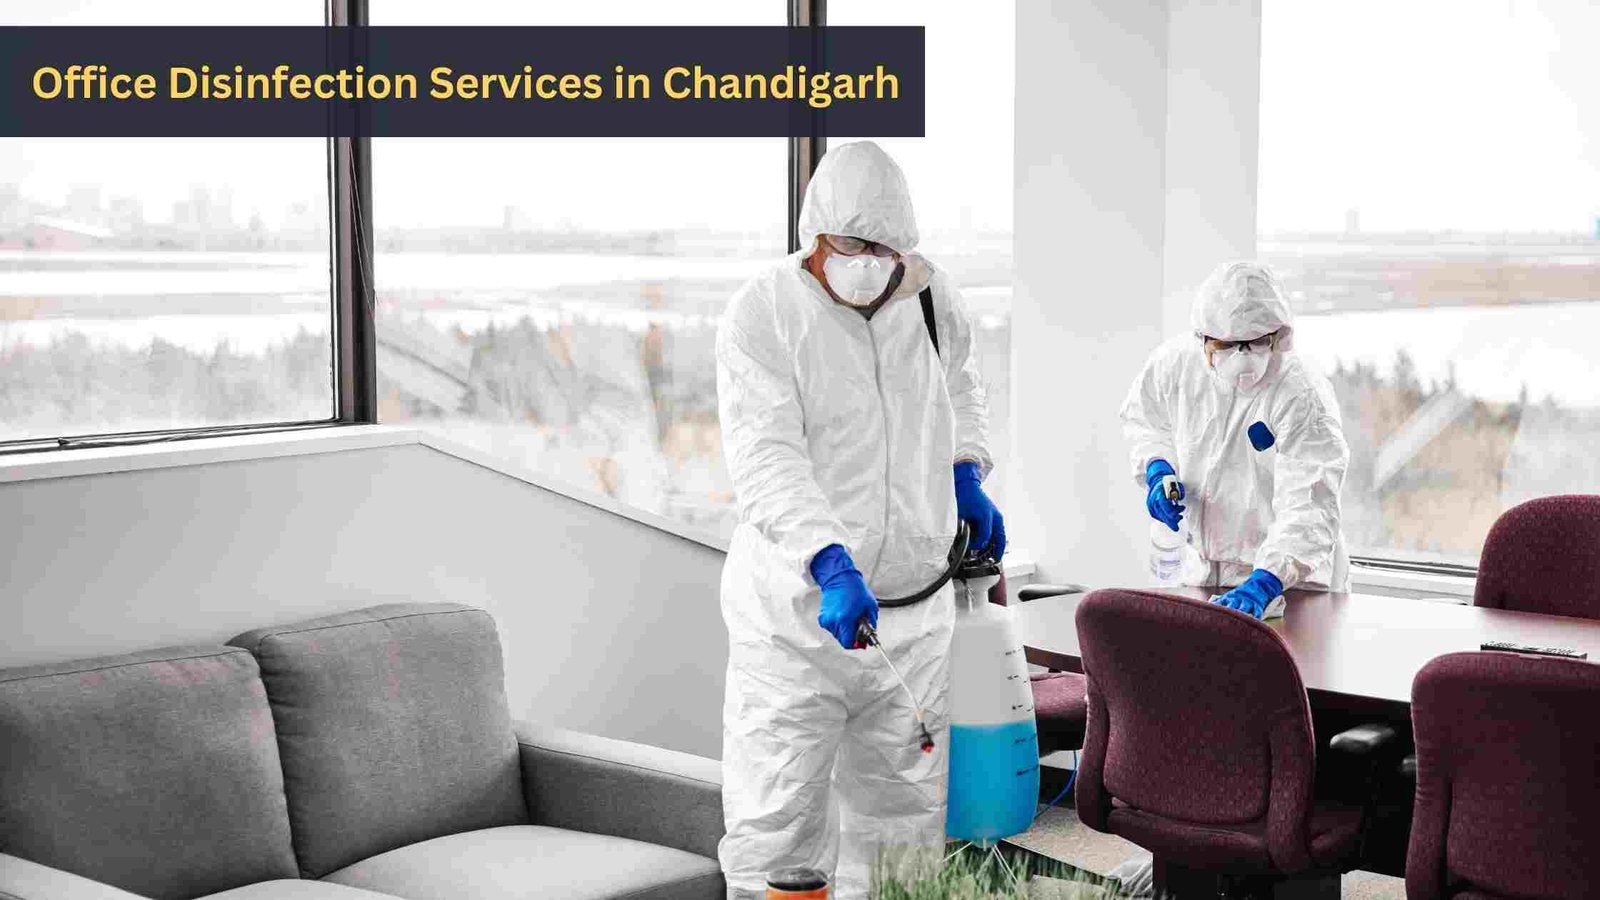 Office Disinfection Services in Chandigarh